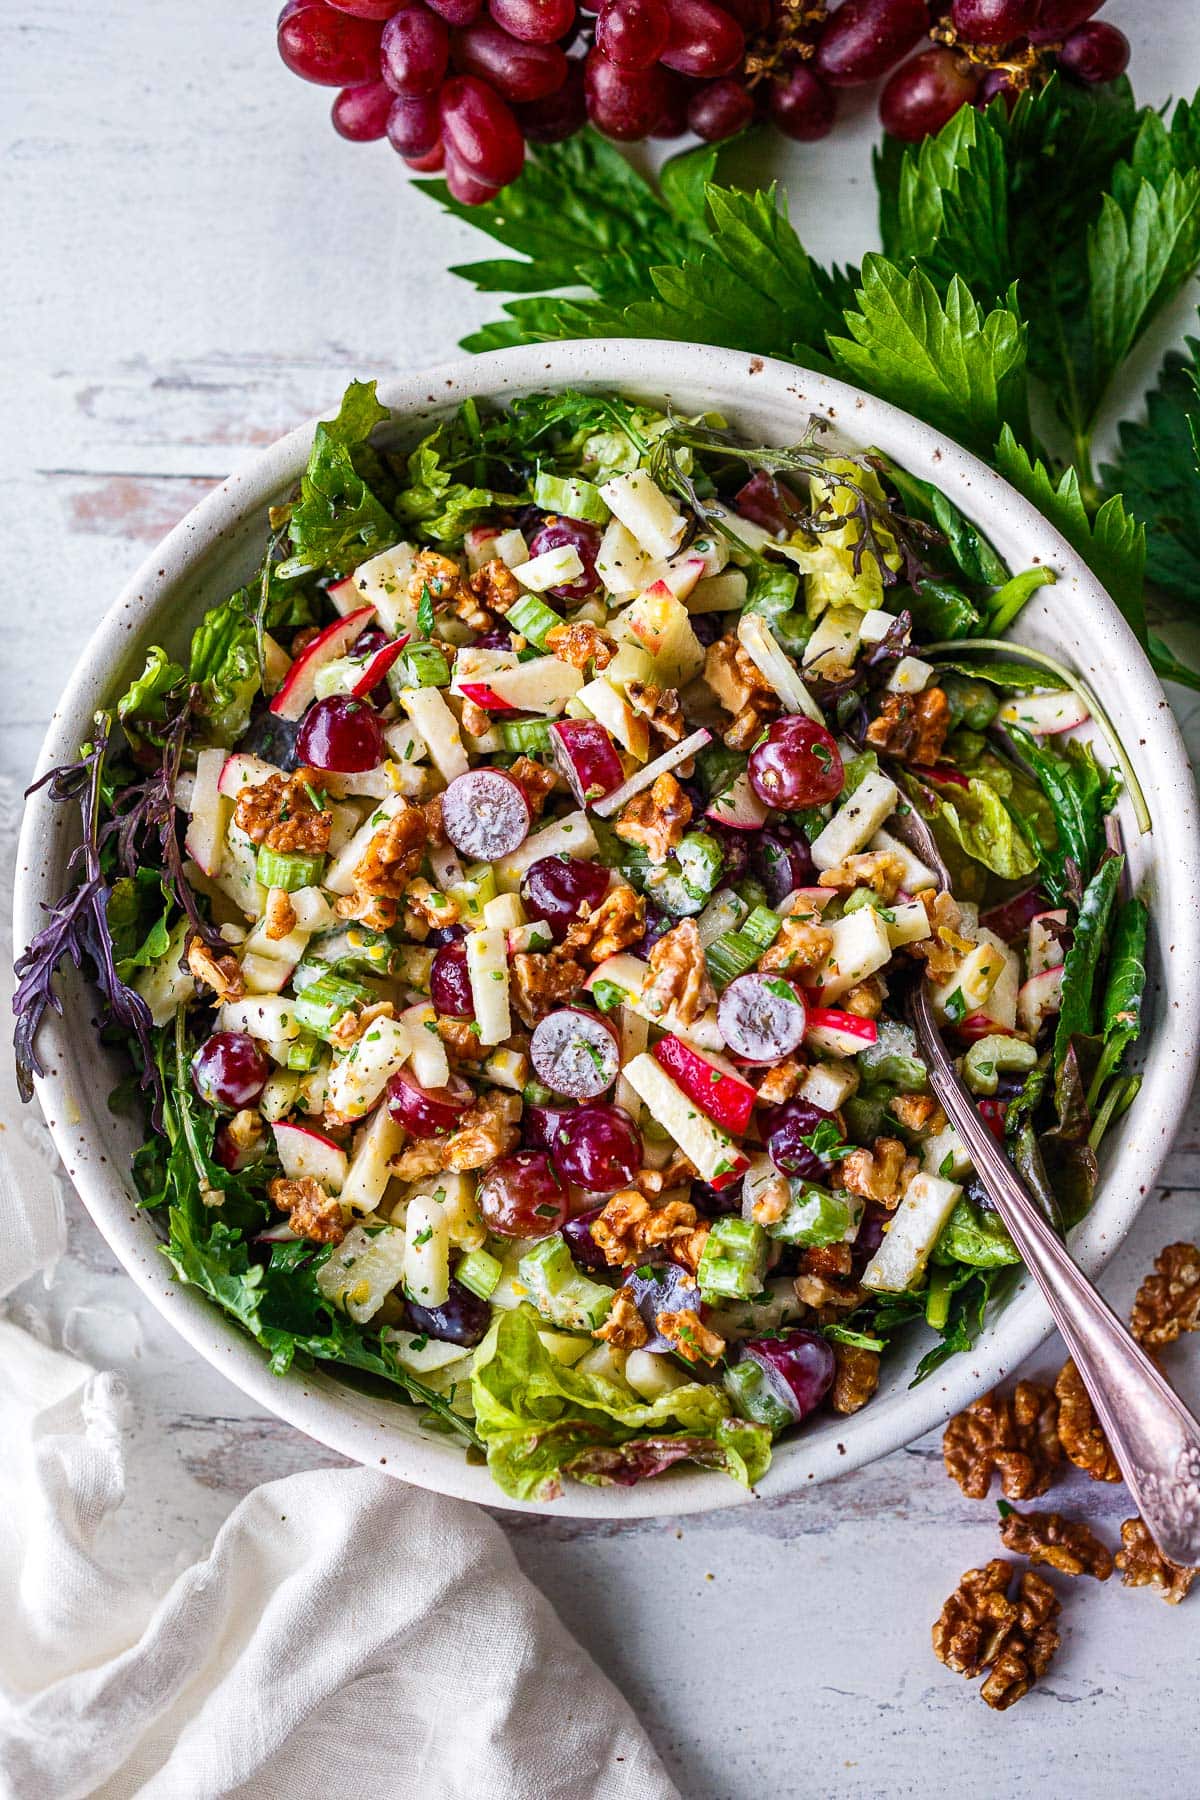 An updated lively version of the classic Waldorf Salad recipe combining the crisp sweetness of apples and grapes with the crunch of celery and walnuts, all tossed in a creamy Greek yogurt dressing for a refreshing and satisfying salad!